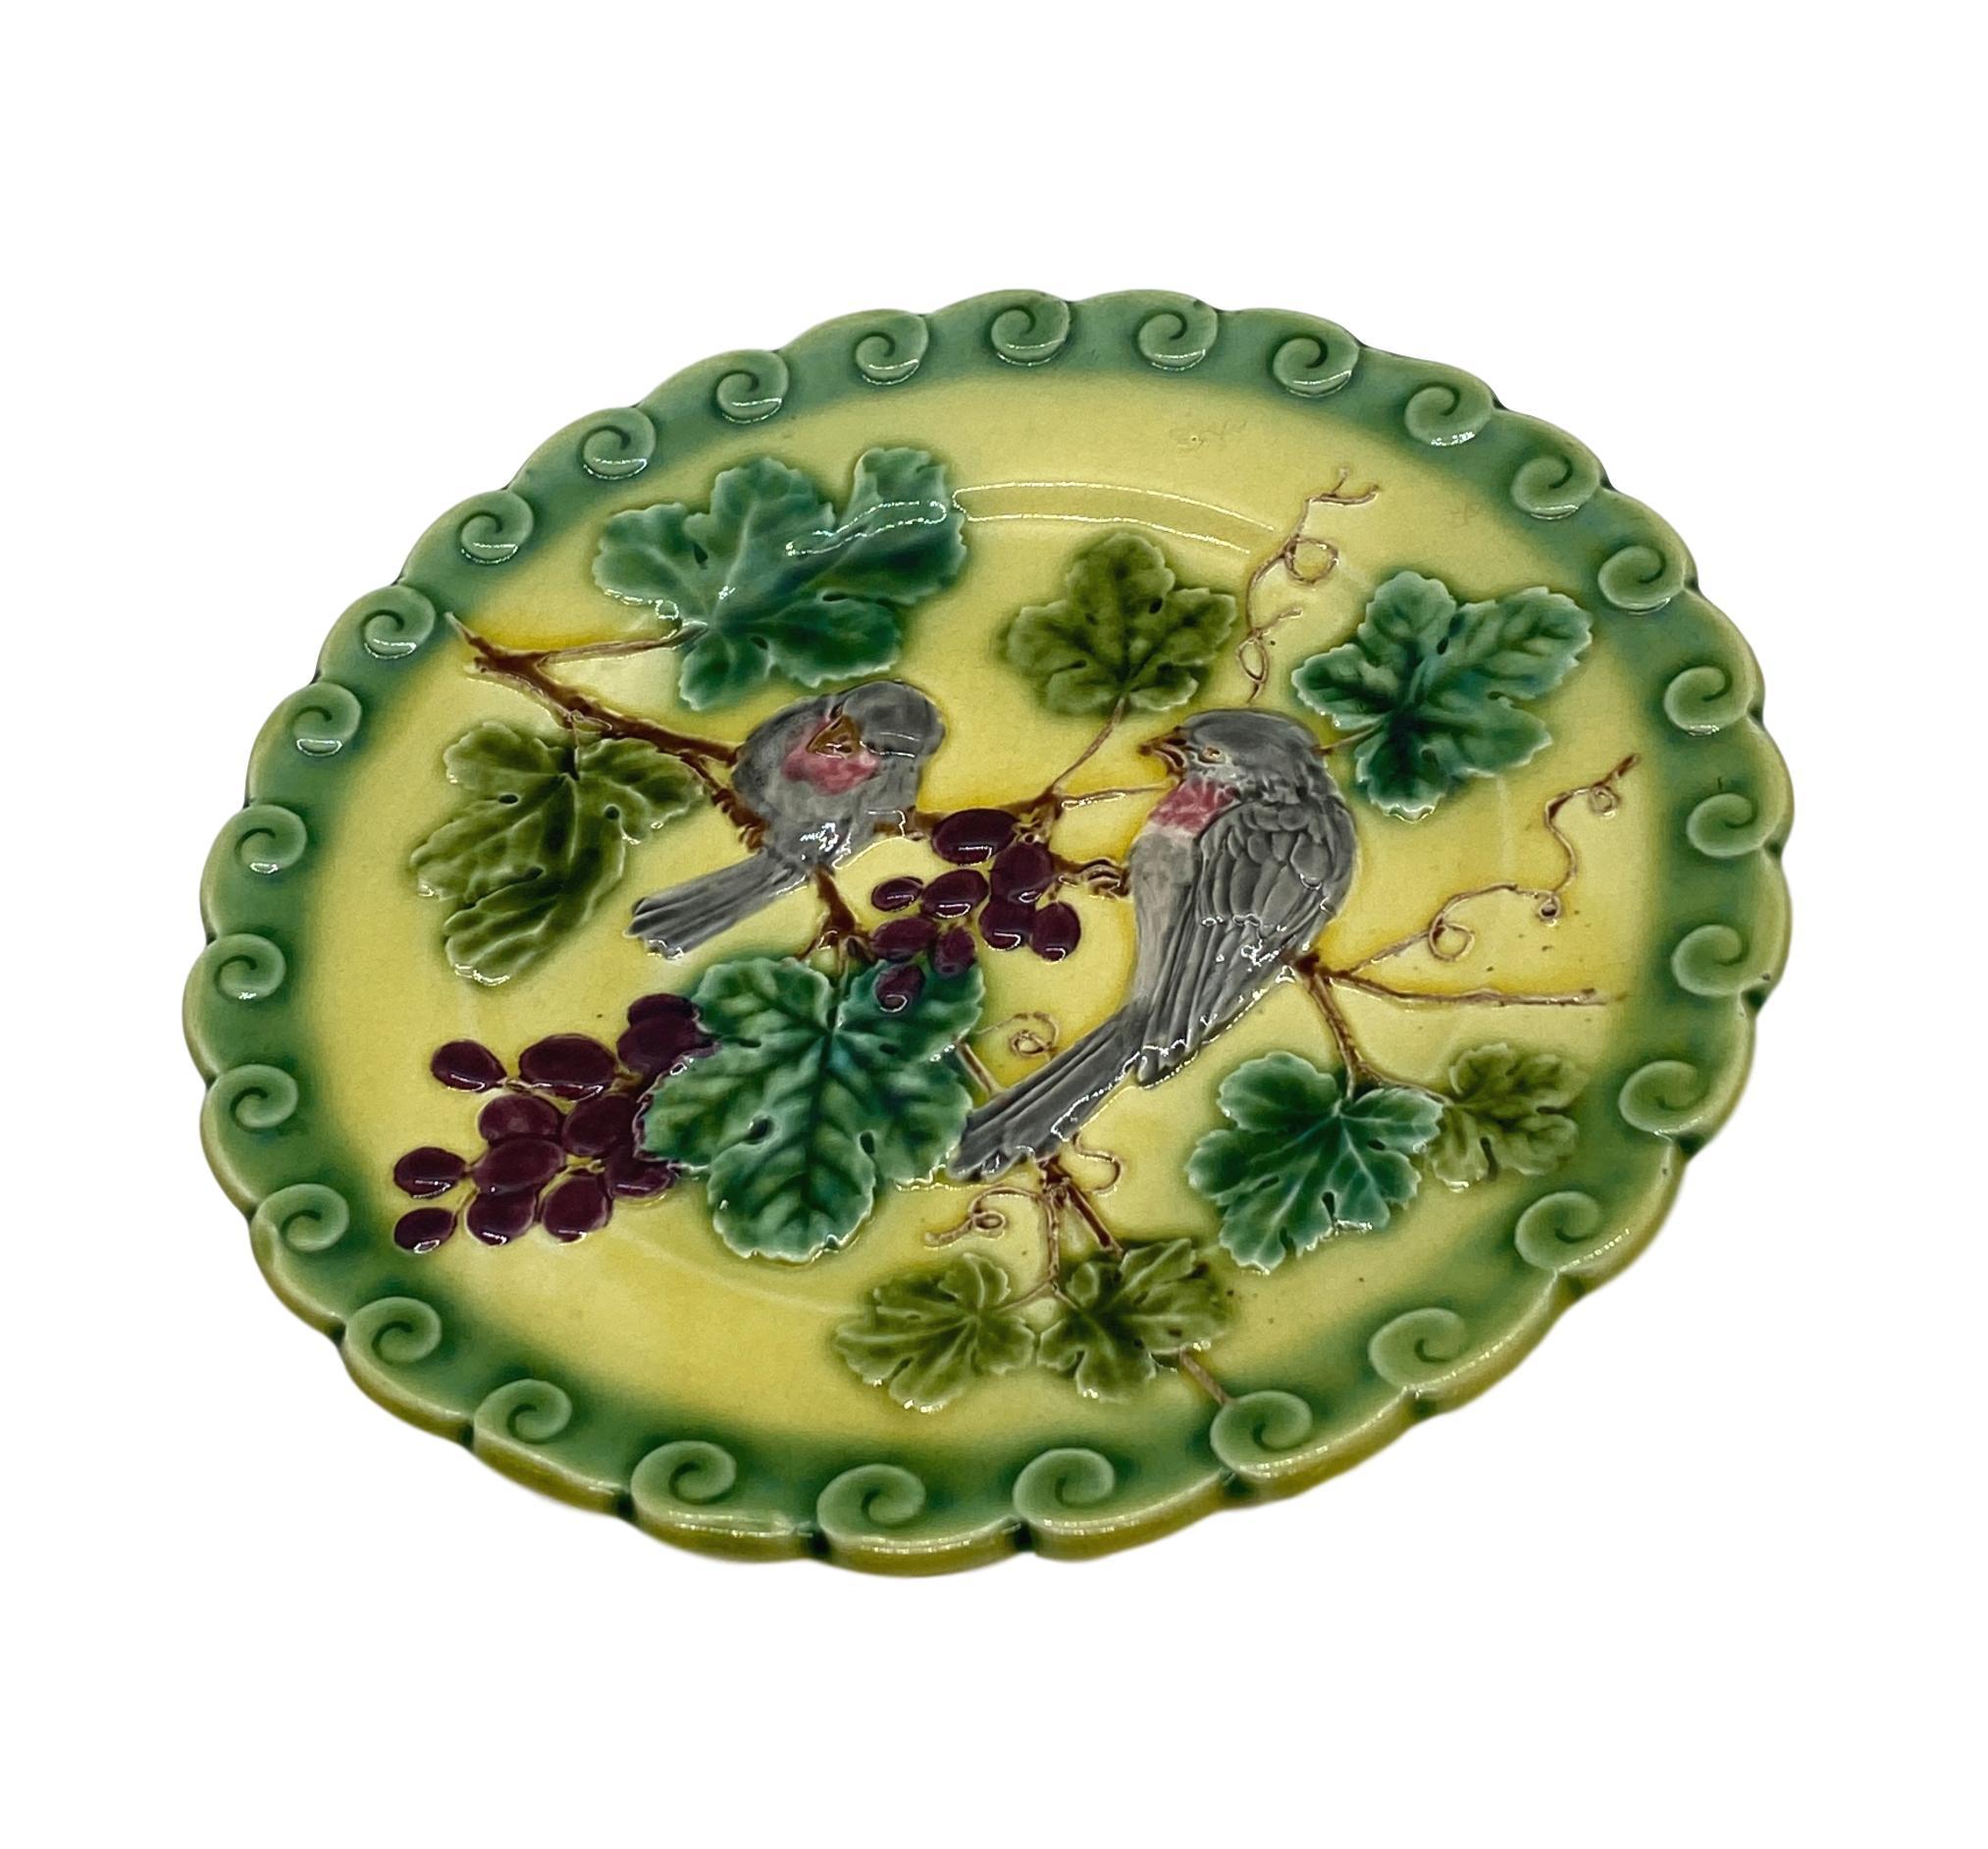 French Majolica (Barbotine) Trompe L'oeil plate, with two relief molded pink sparrows among purple grapes and green glazed leafy vines, on a yellow glazed ground, with a stylized rolling wave, scalloped and green glazed border, the reverse with